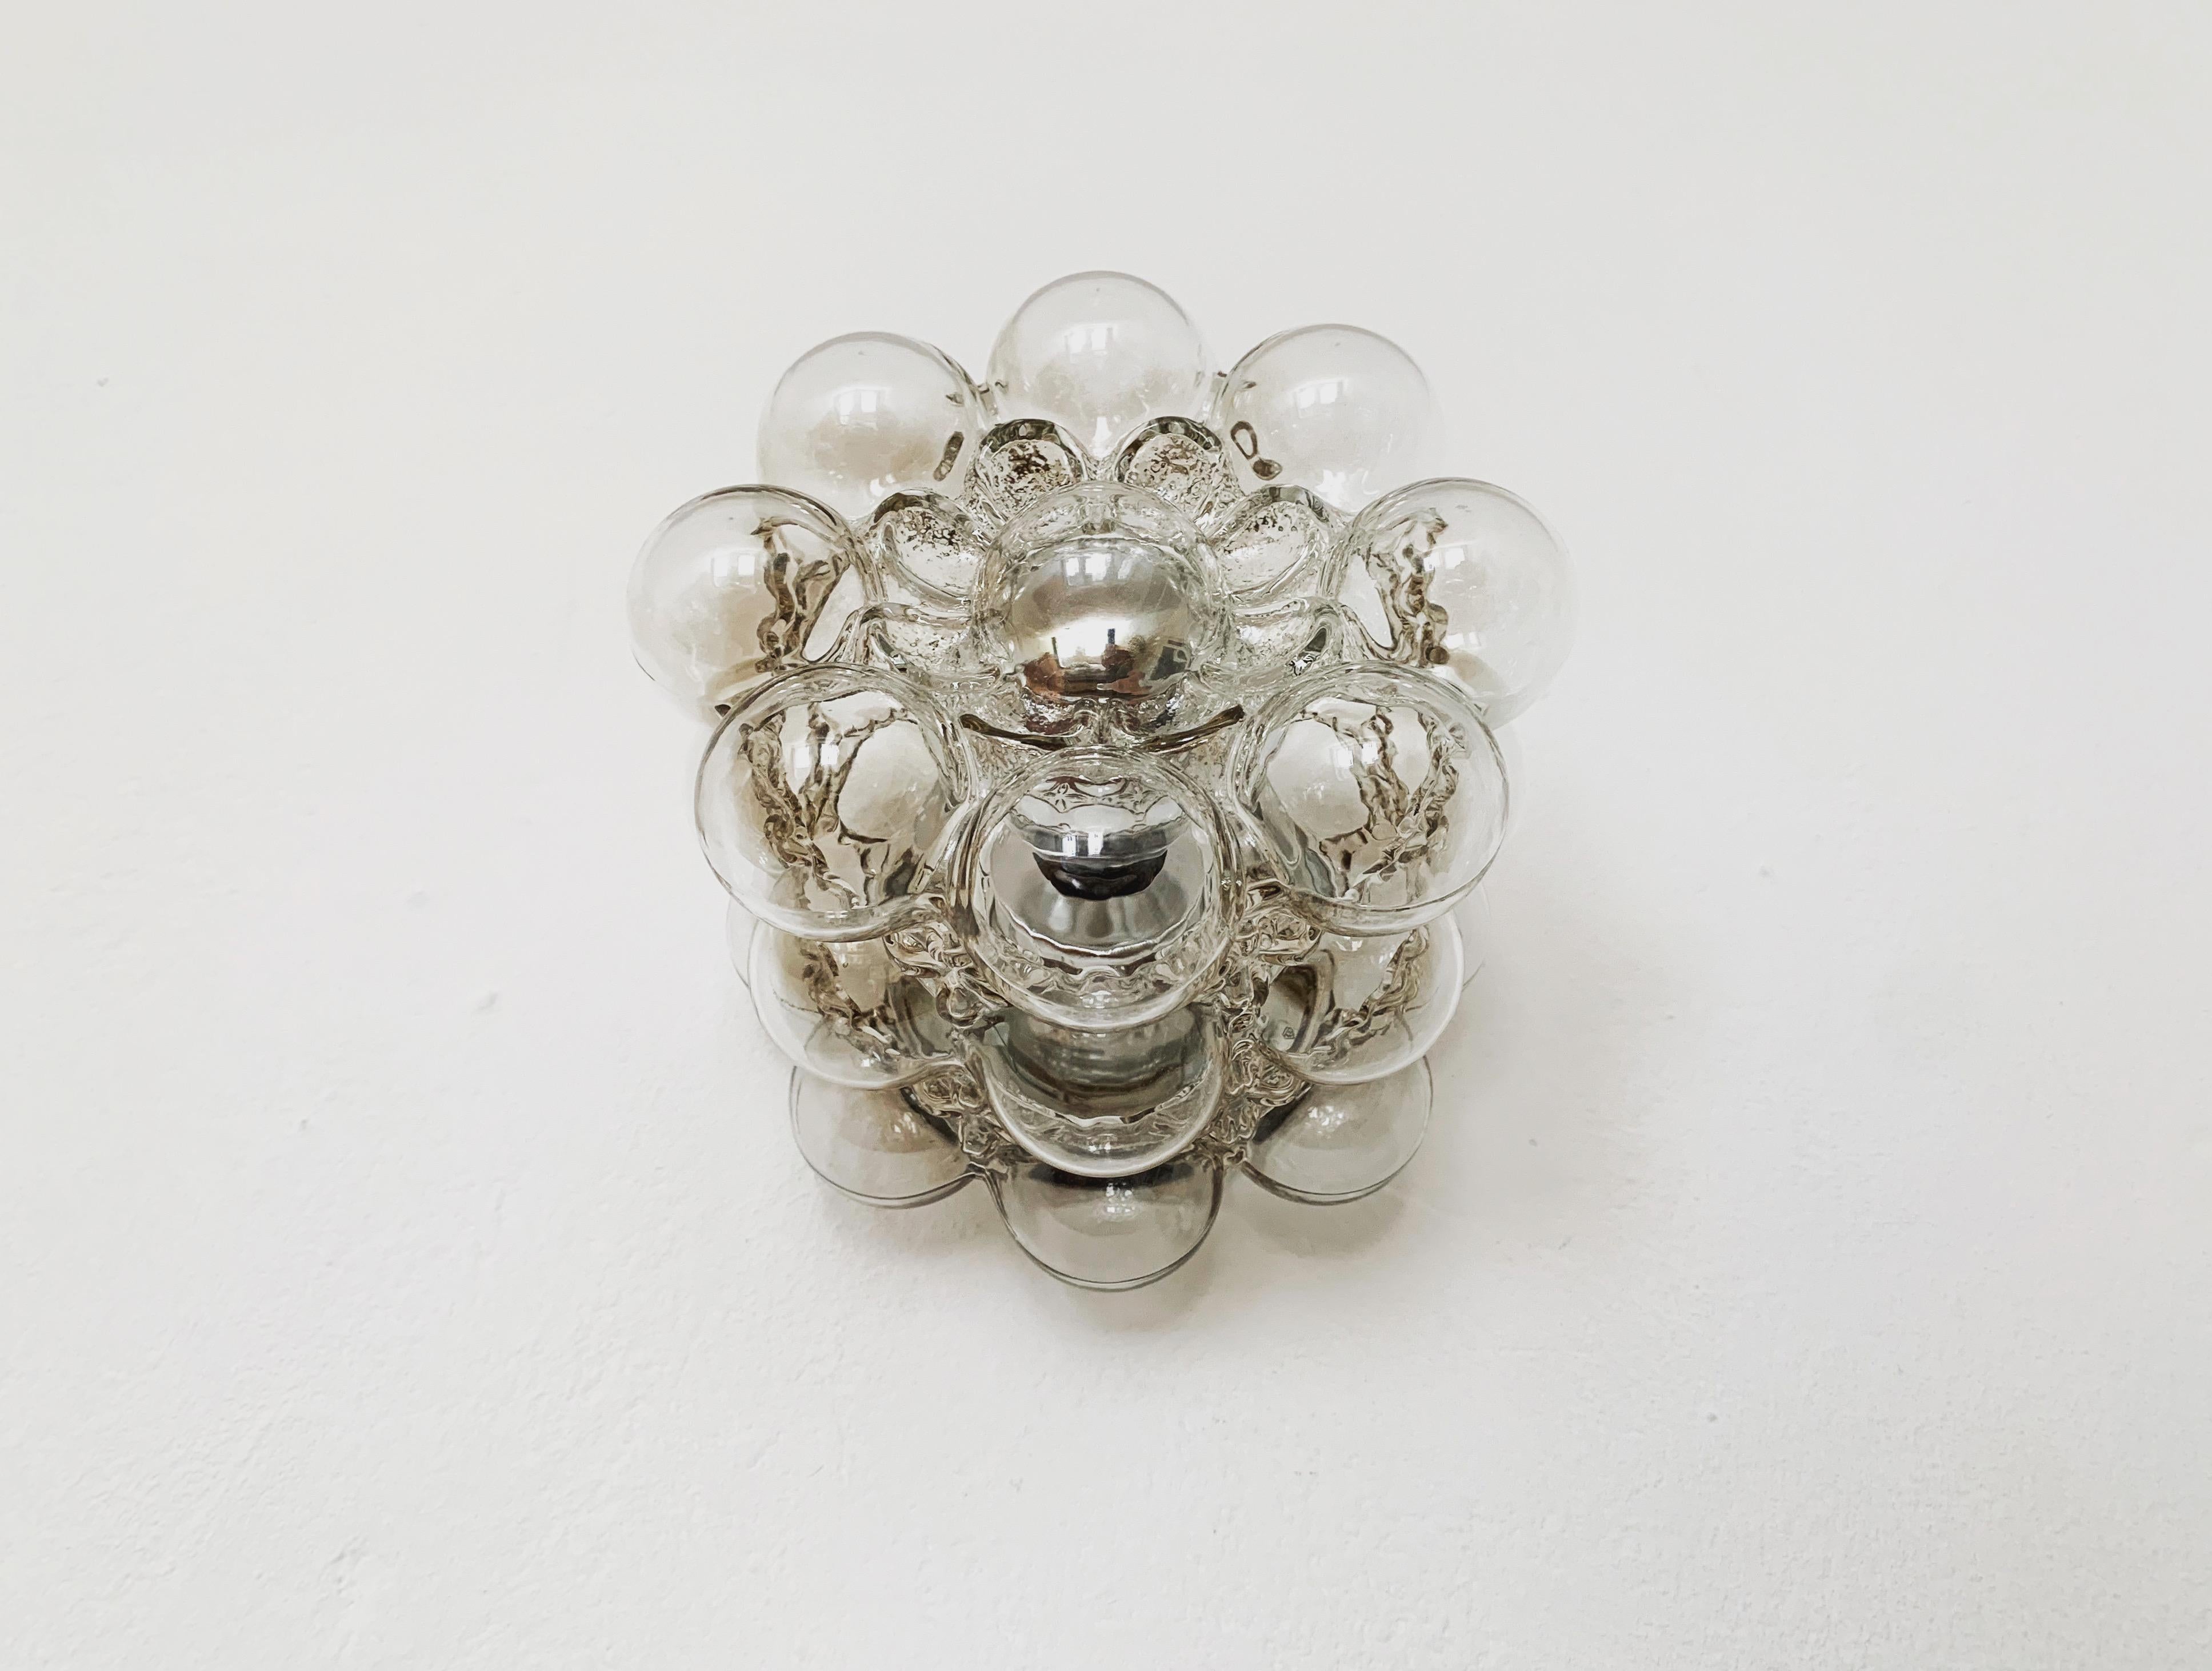 Exceptionally beautiful bubble wall or ceiling lamp from the 1960s.
Fantastic design and high quality workmanship.
The lamp impresses with the spectacular play of light.

Manufacturer: Glashütte Limburg.
Design: Helena